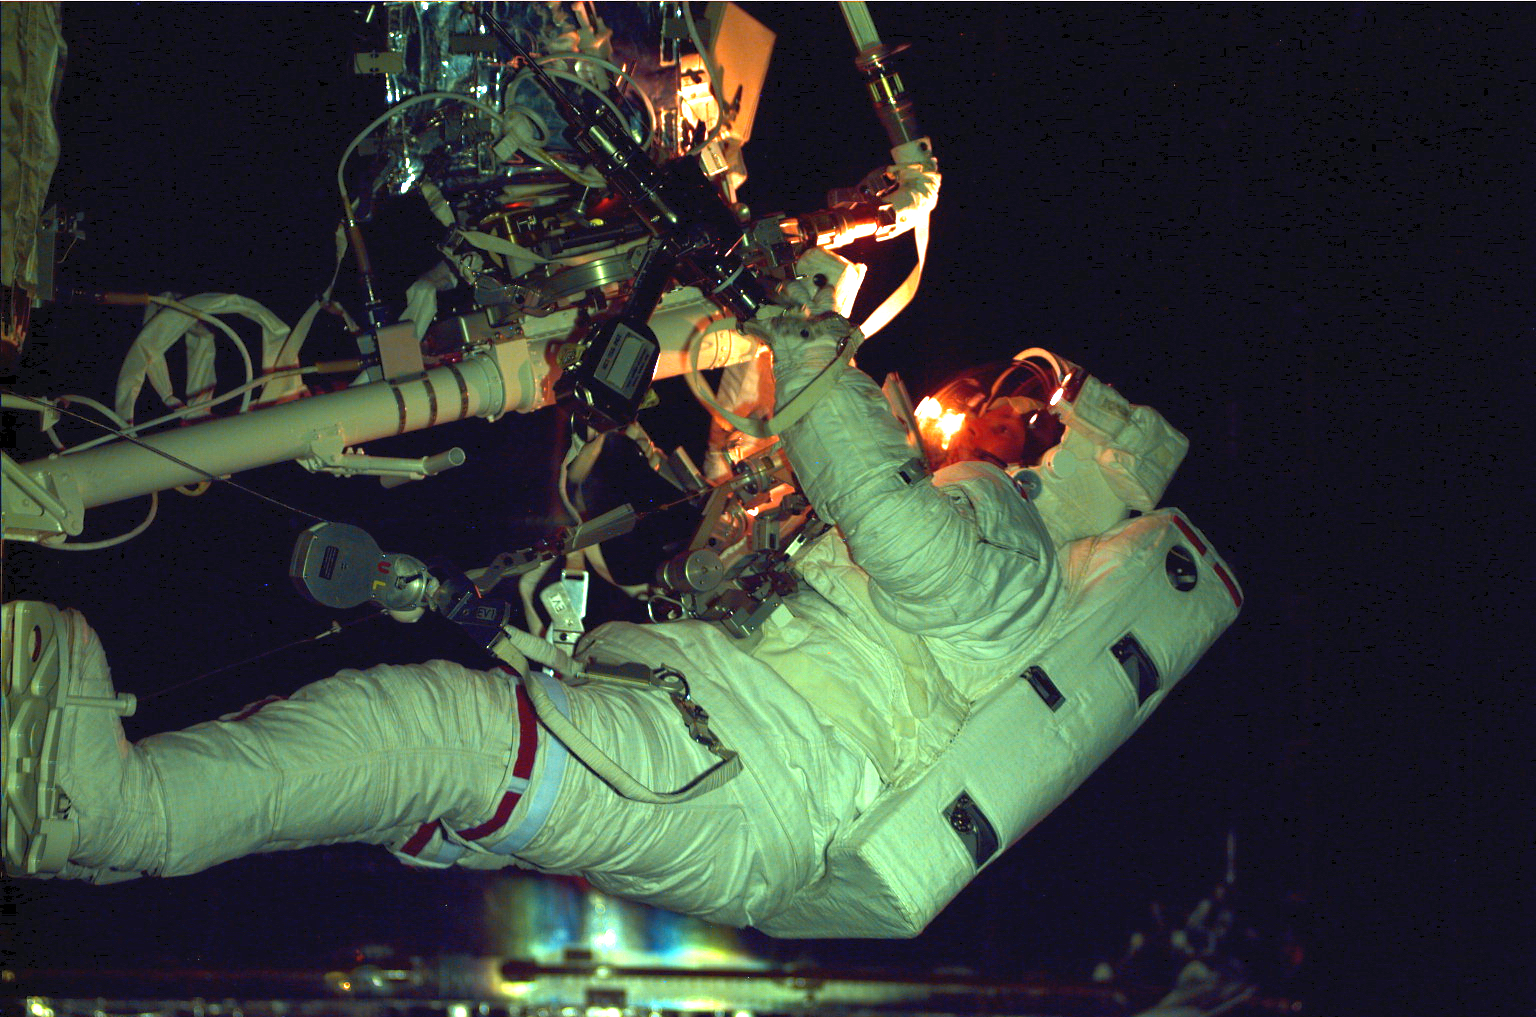 An astronaut with many tools attached to a workstation in front of him.